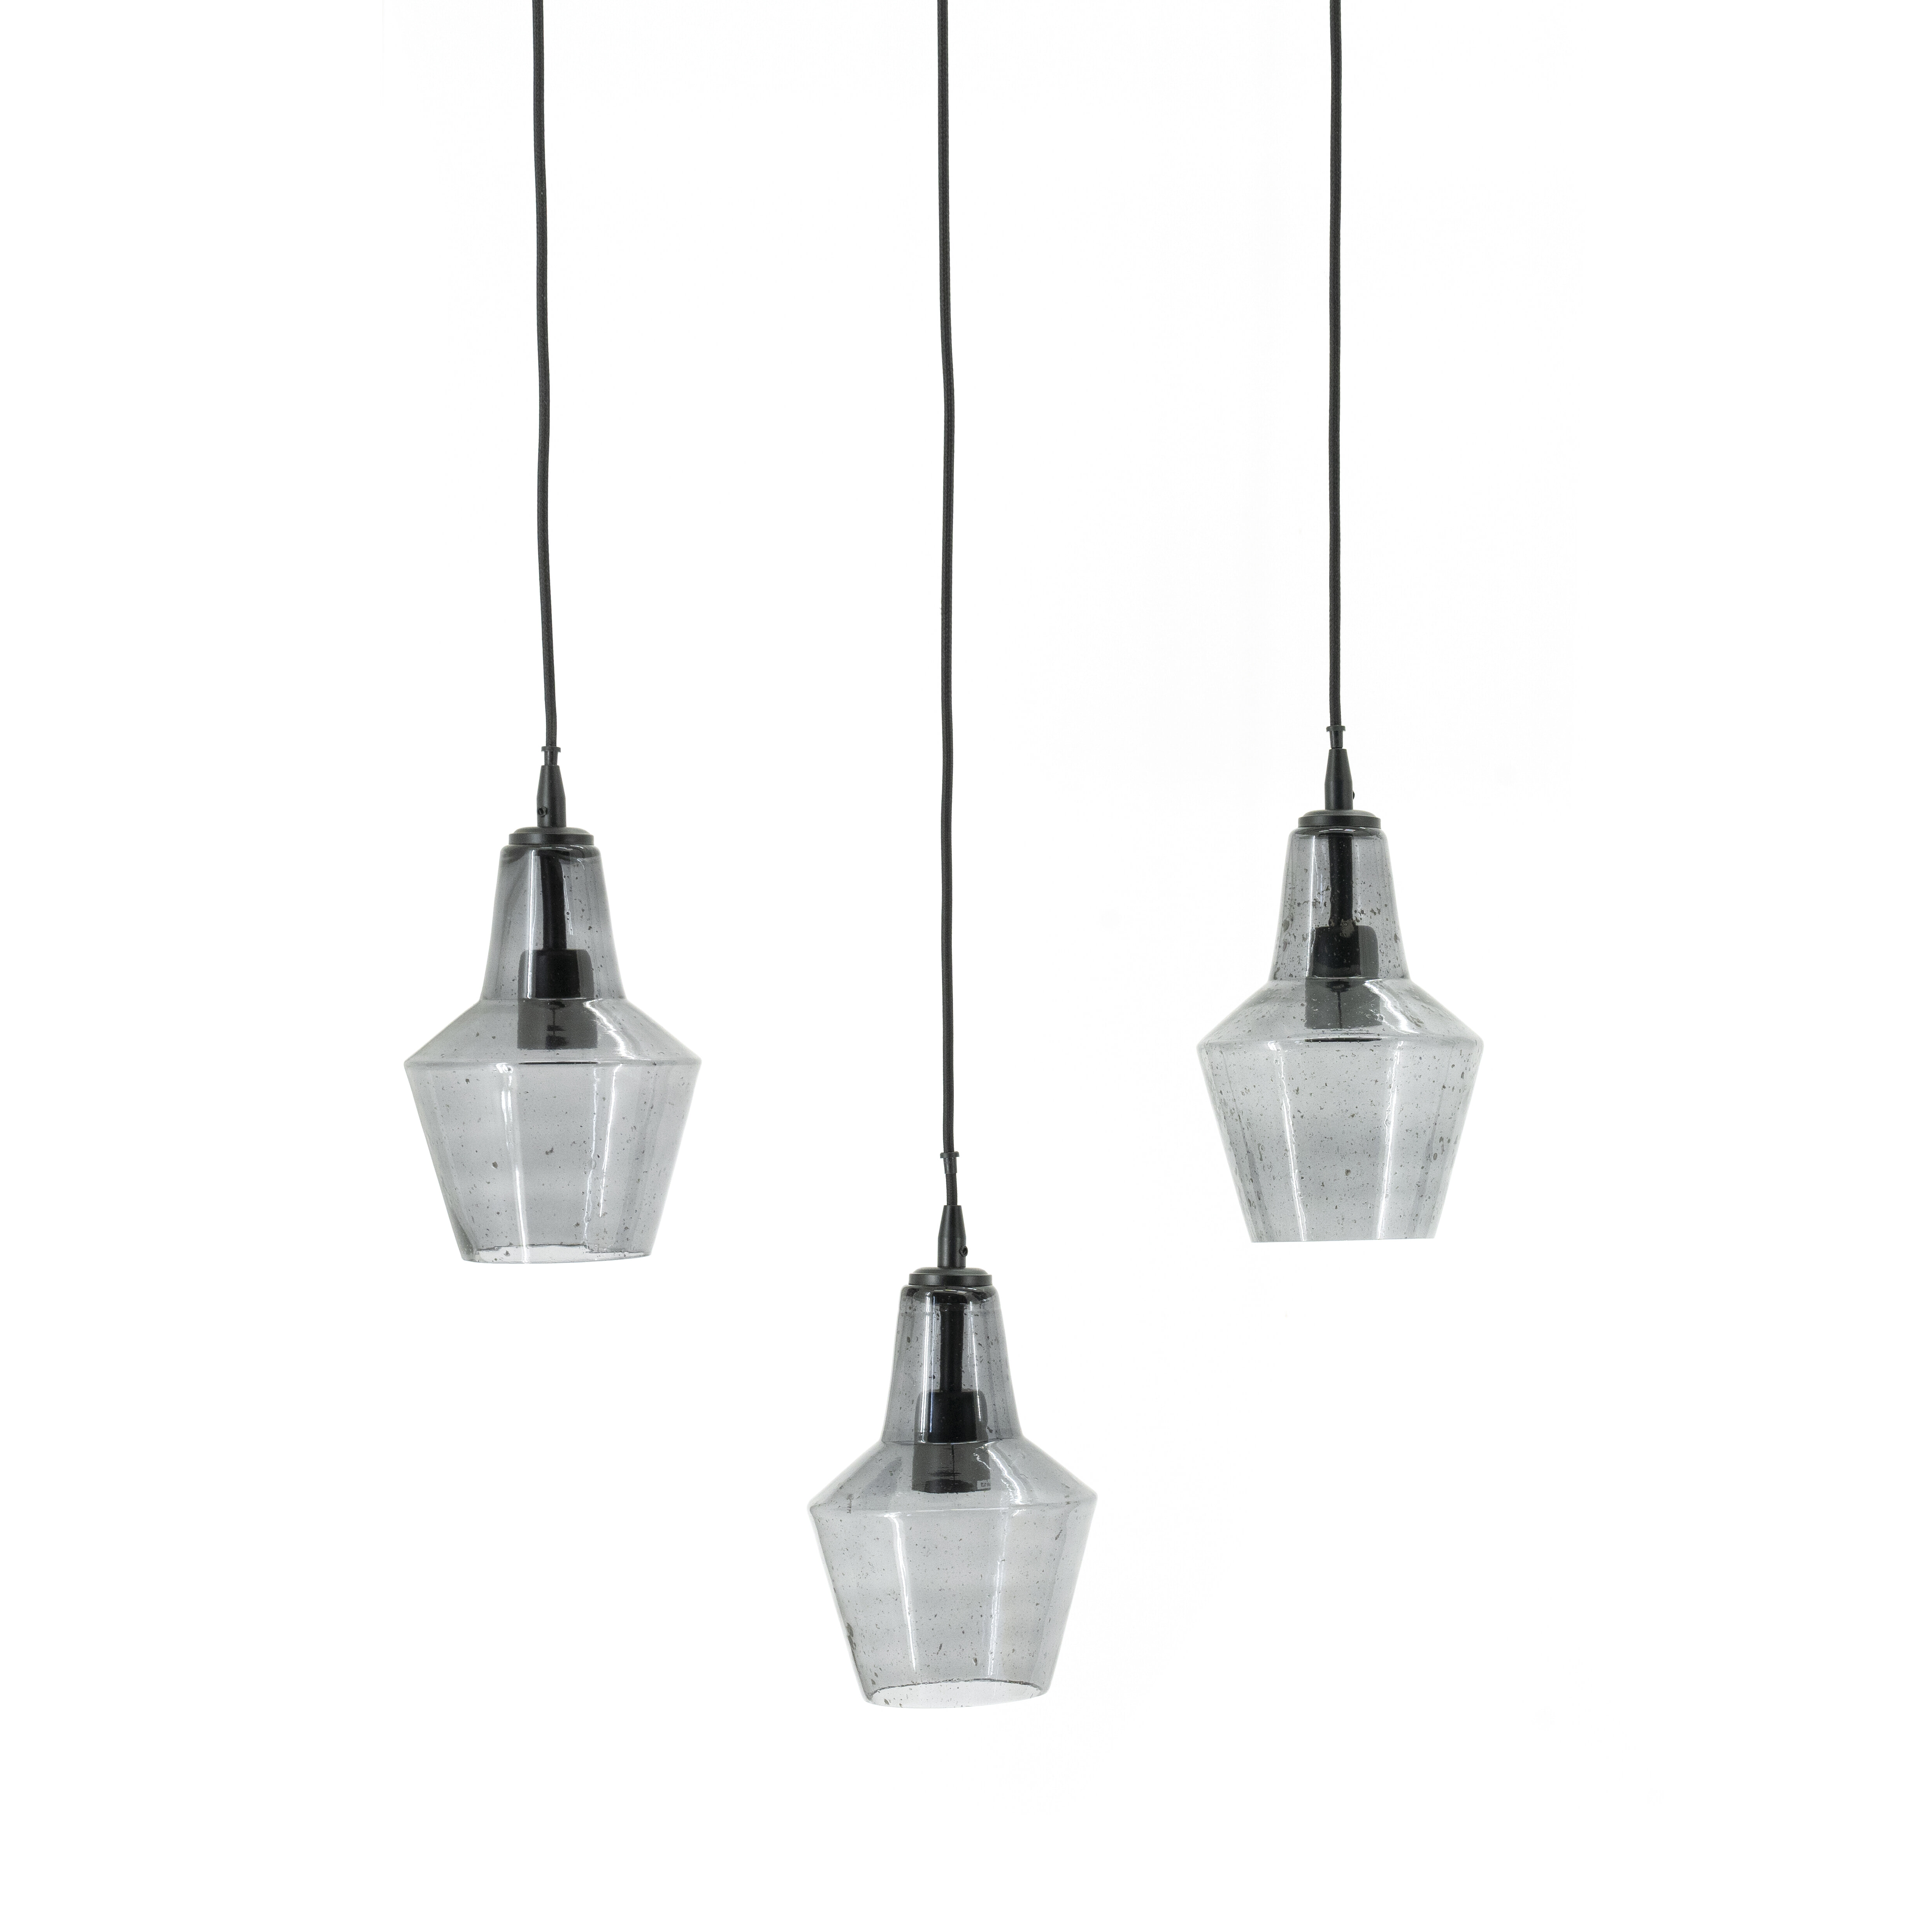 By-Boo Hanglamp Orion Glas, 3-lamps - Zwart